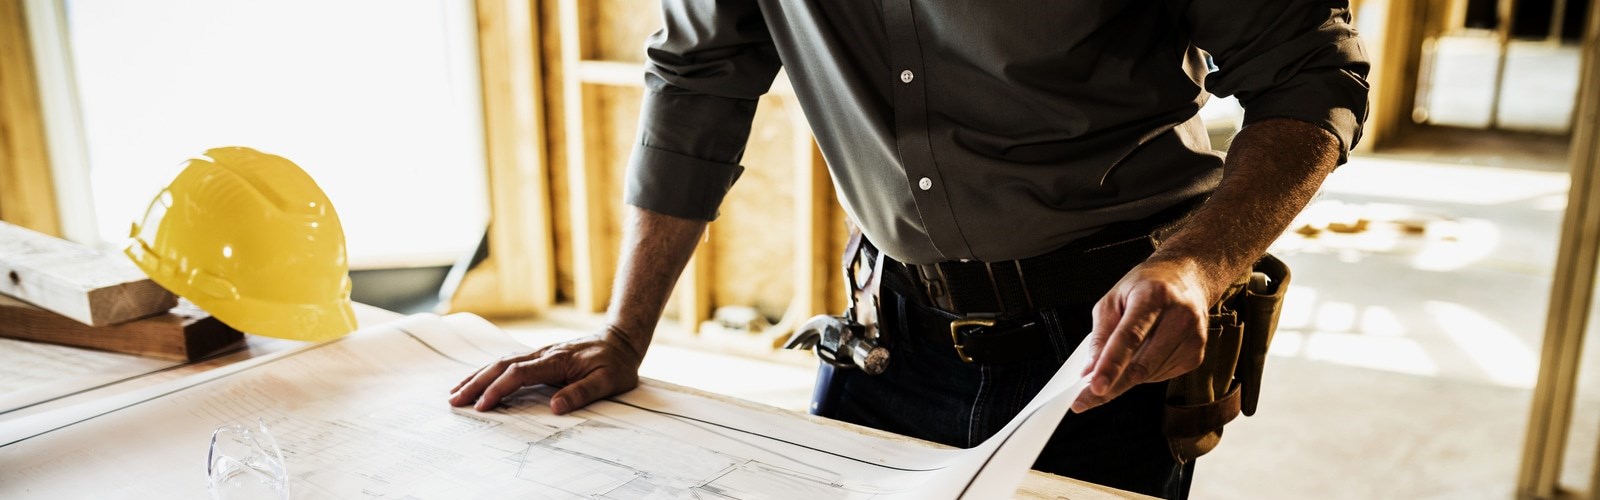 Man flipping through building plans at construction site